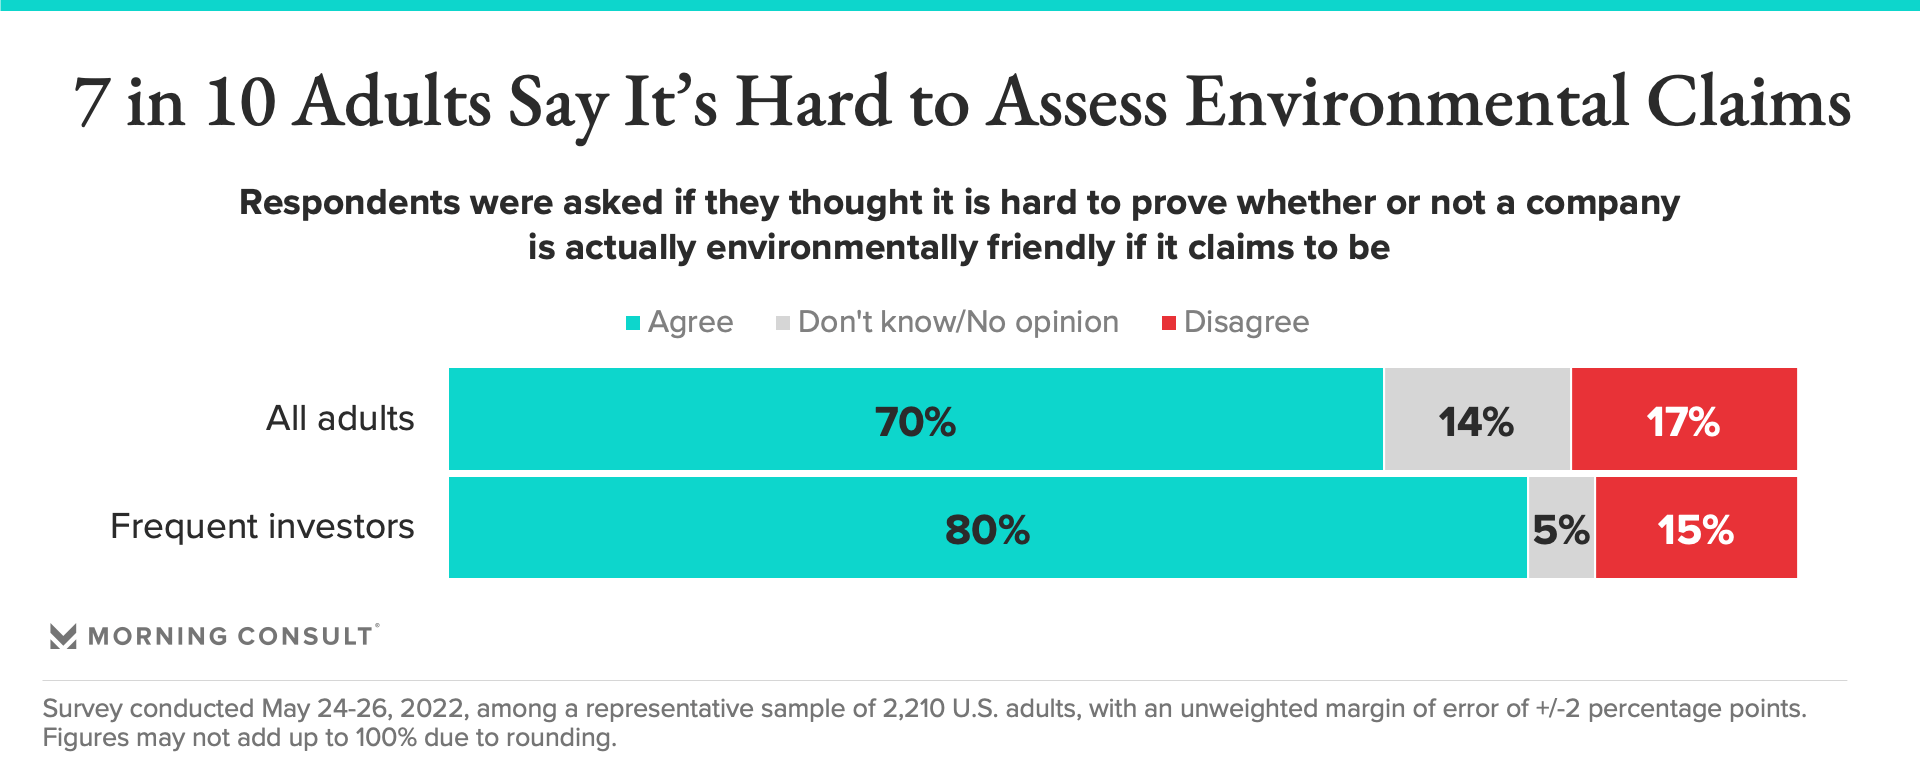 7 in 10 adults say its hard to assess environmental claims by companies.